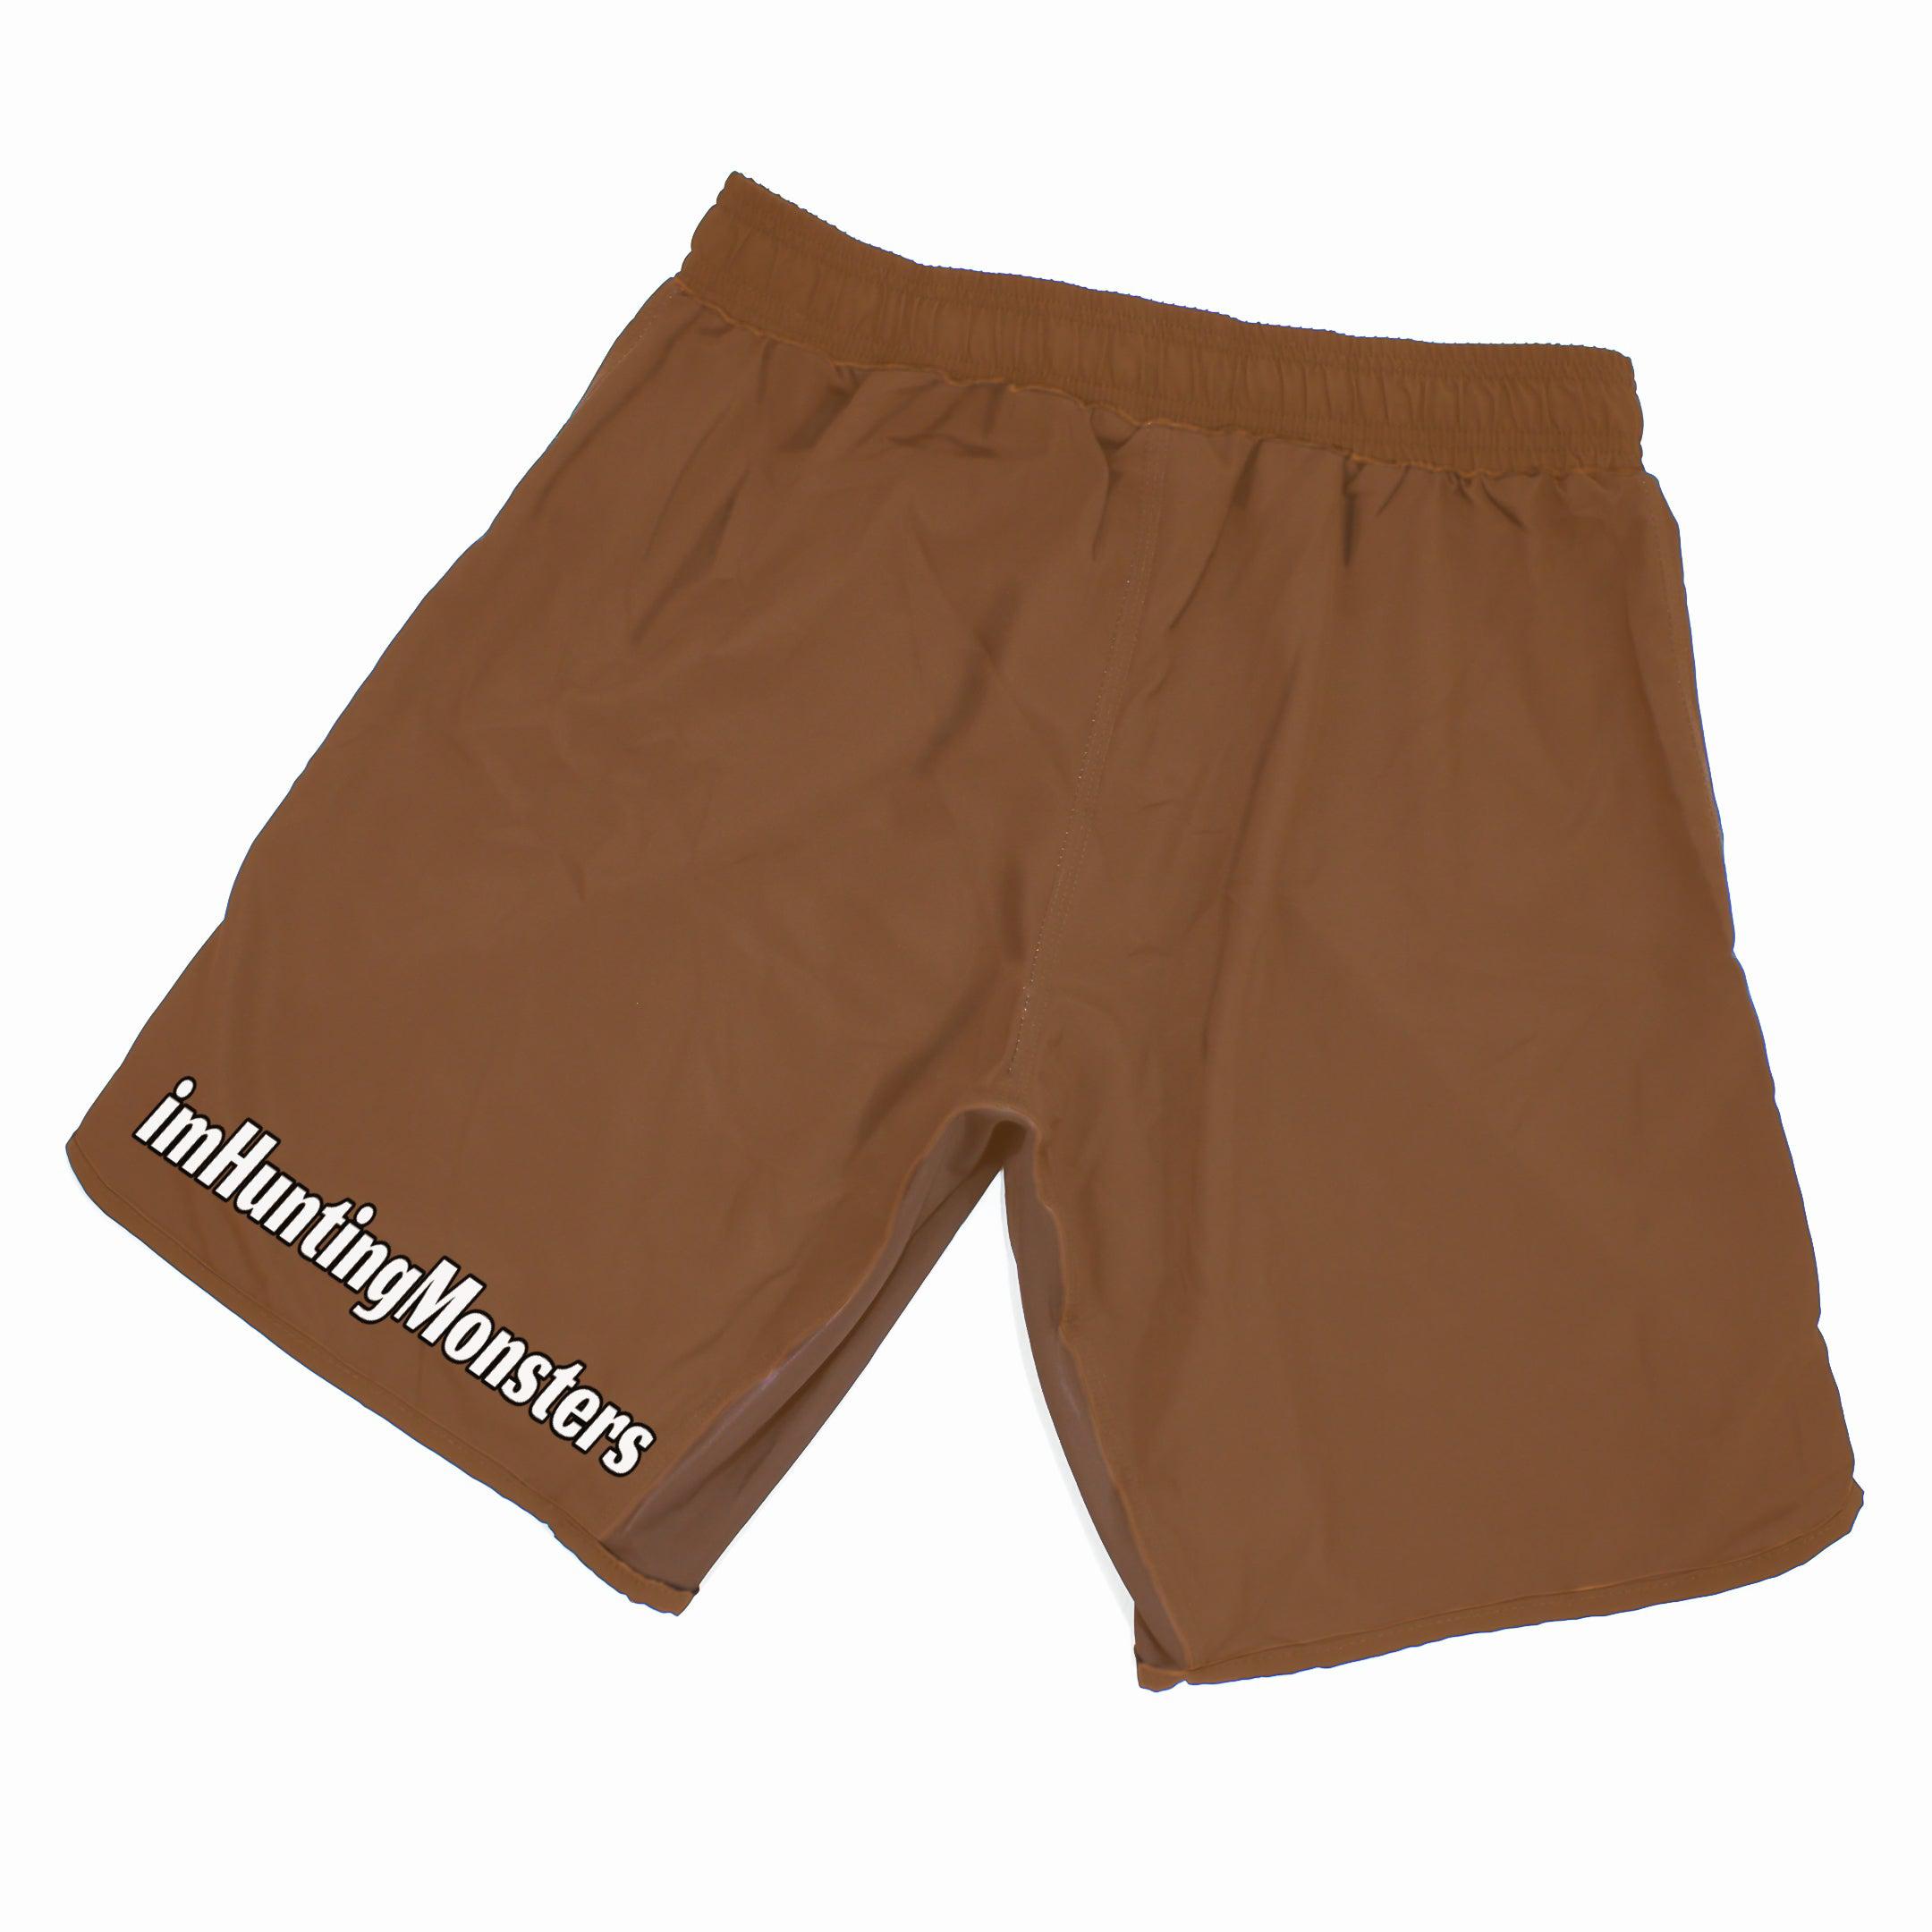 imHuntingMonsters Brown Grappling Shorts - Zen